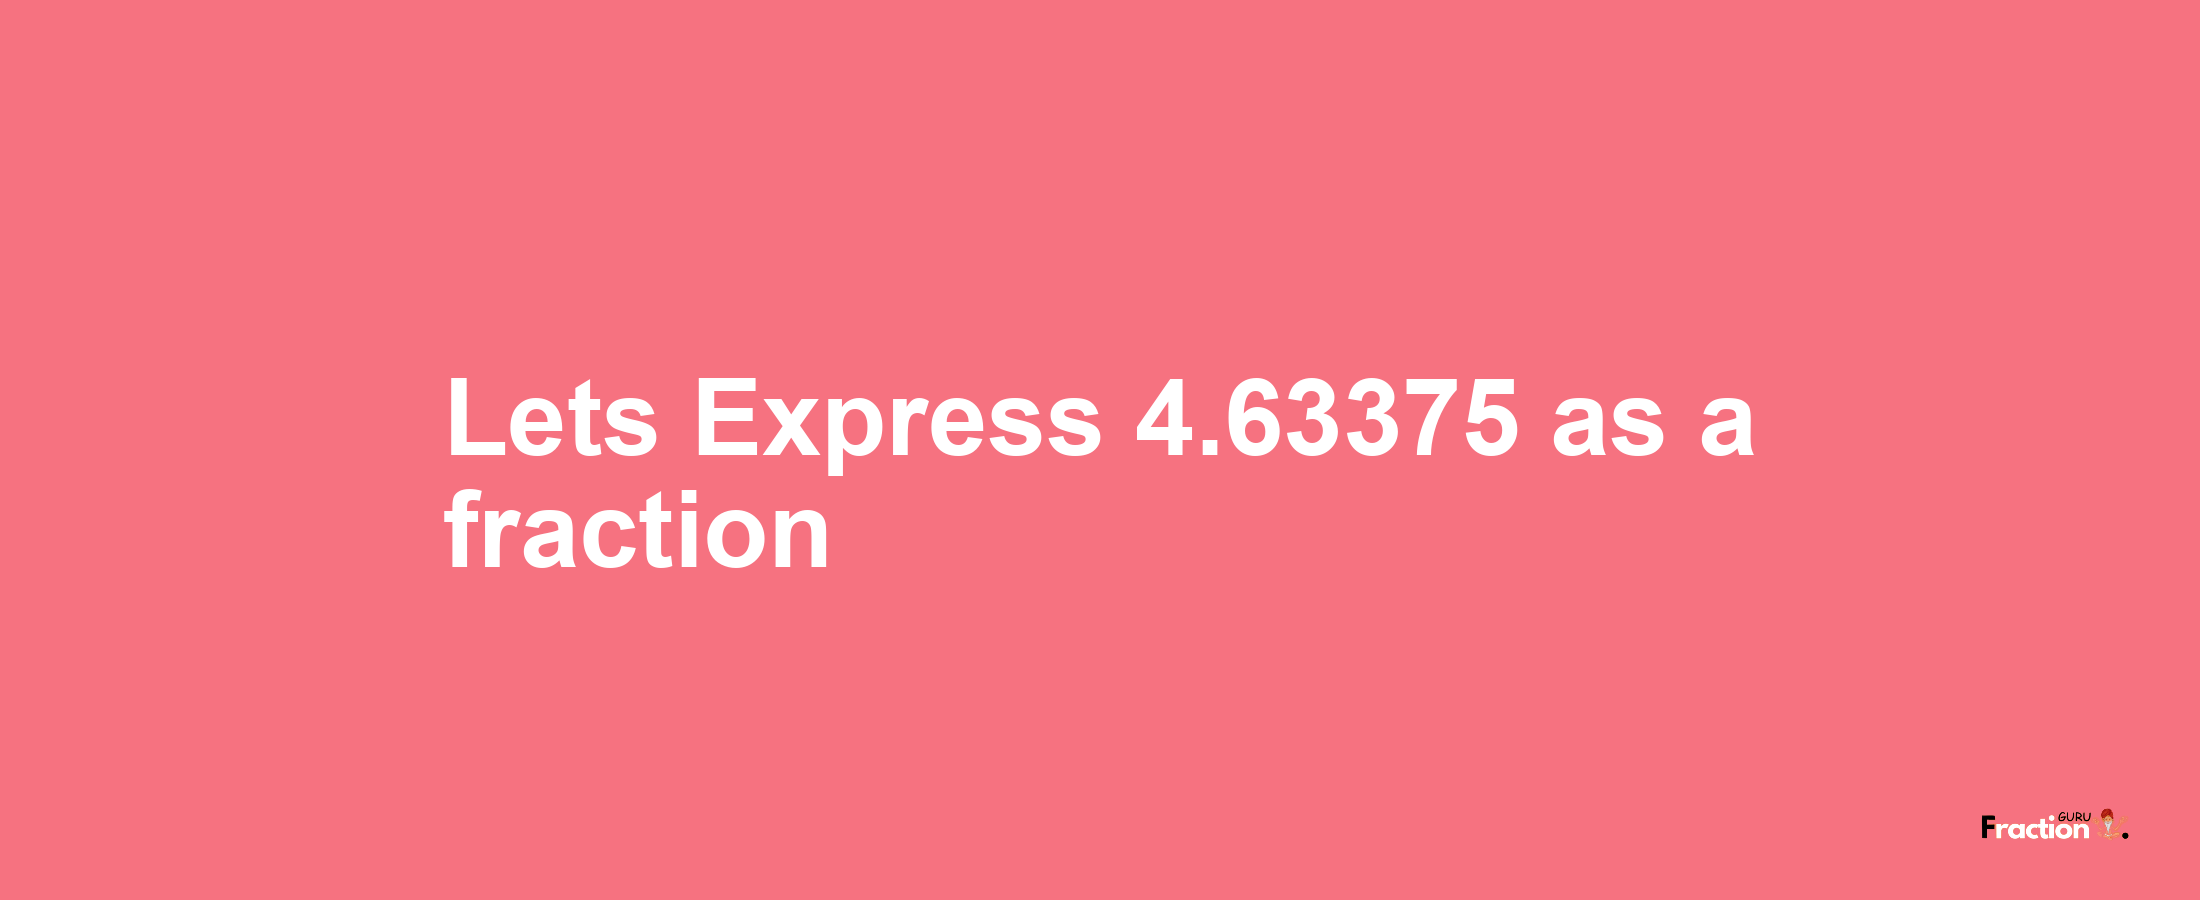 Lets Express 4.63375 as afraction